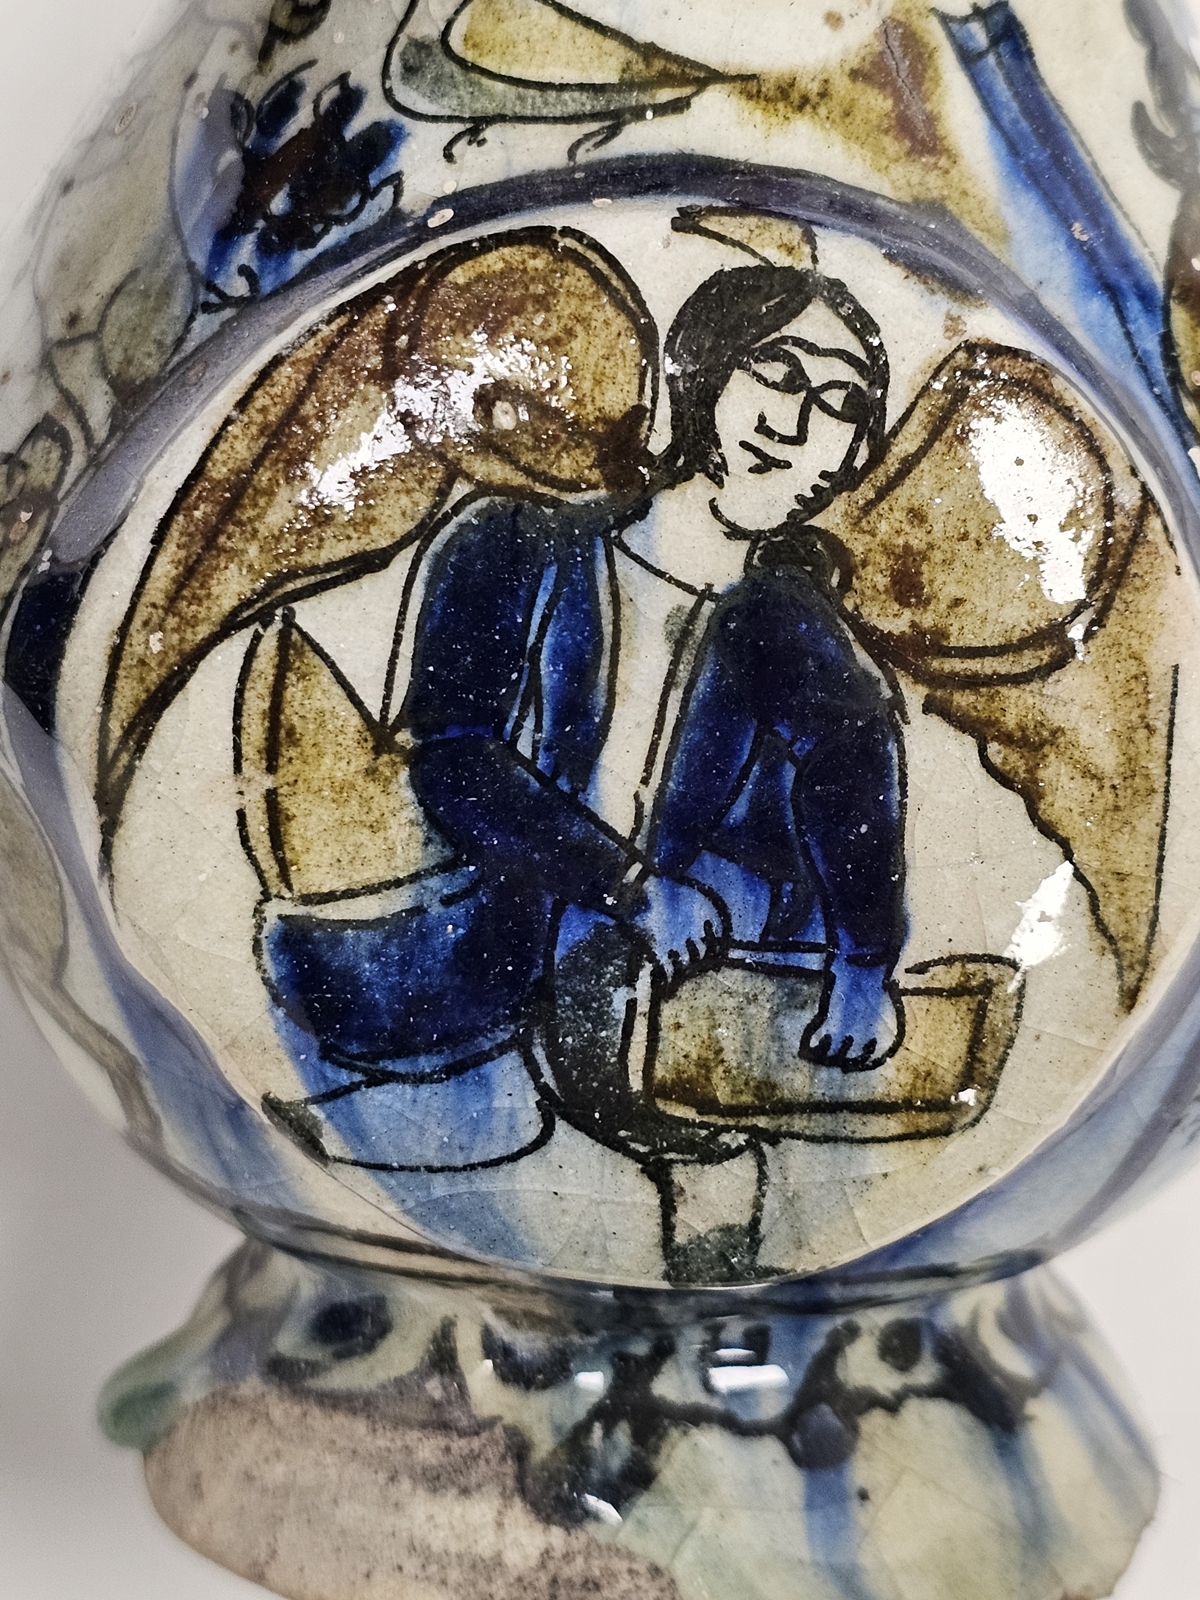 19th century Persian bottle-shaped vase with flared bulbous neck, painted with equestrian figures, - Image 5 of 5